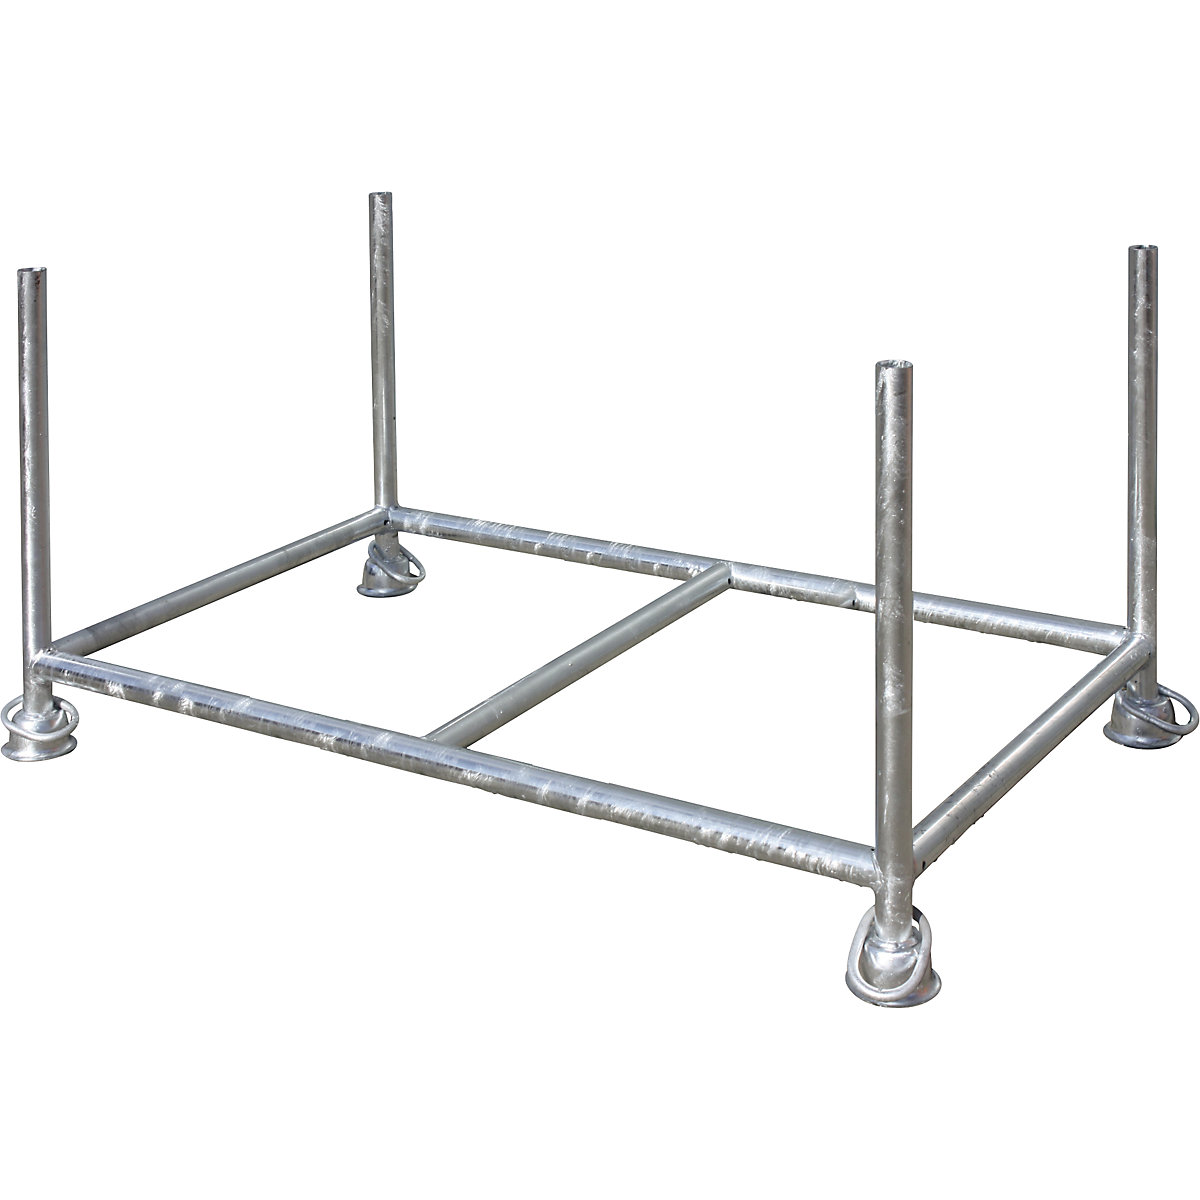 Stacking frame – Eichinger, LxWxH 1500 x 870 x 750 mm, with 2 cross tubes, zinc plated-1